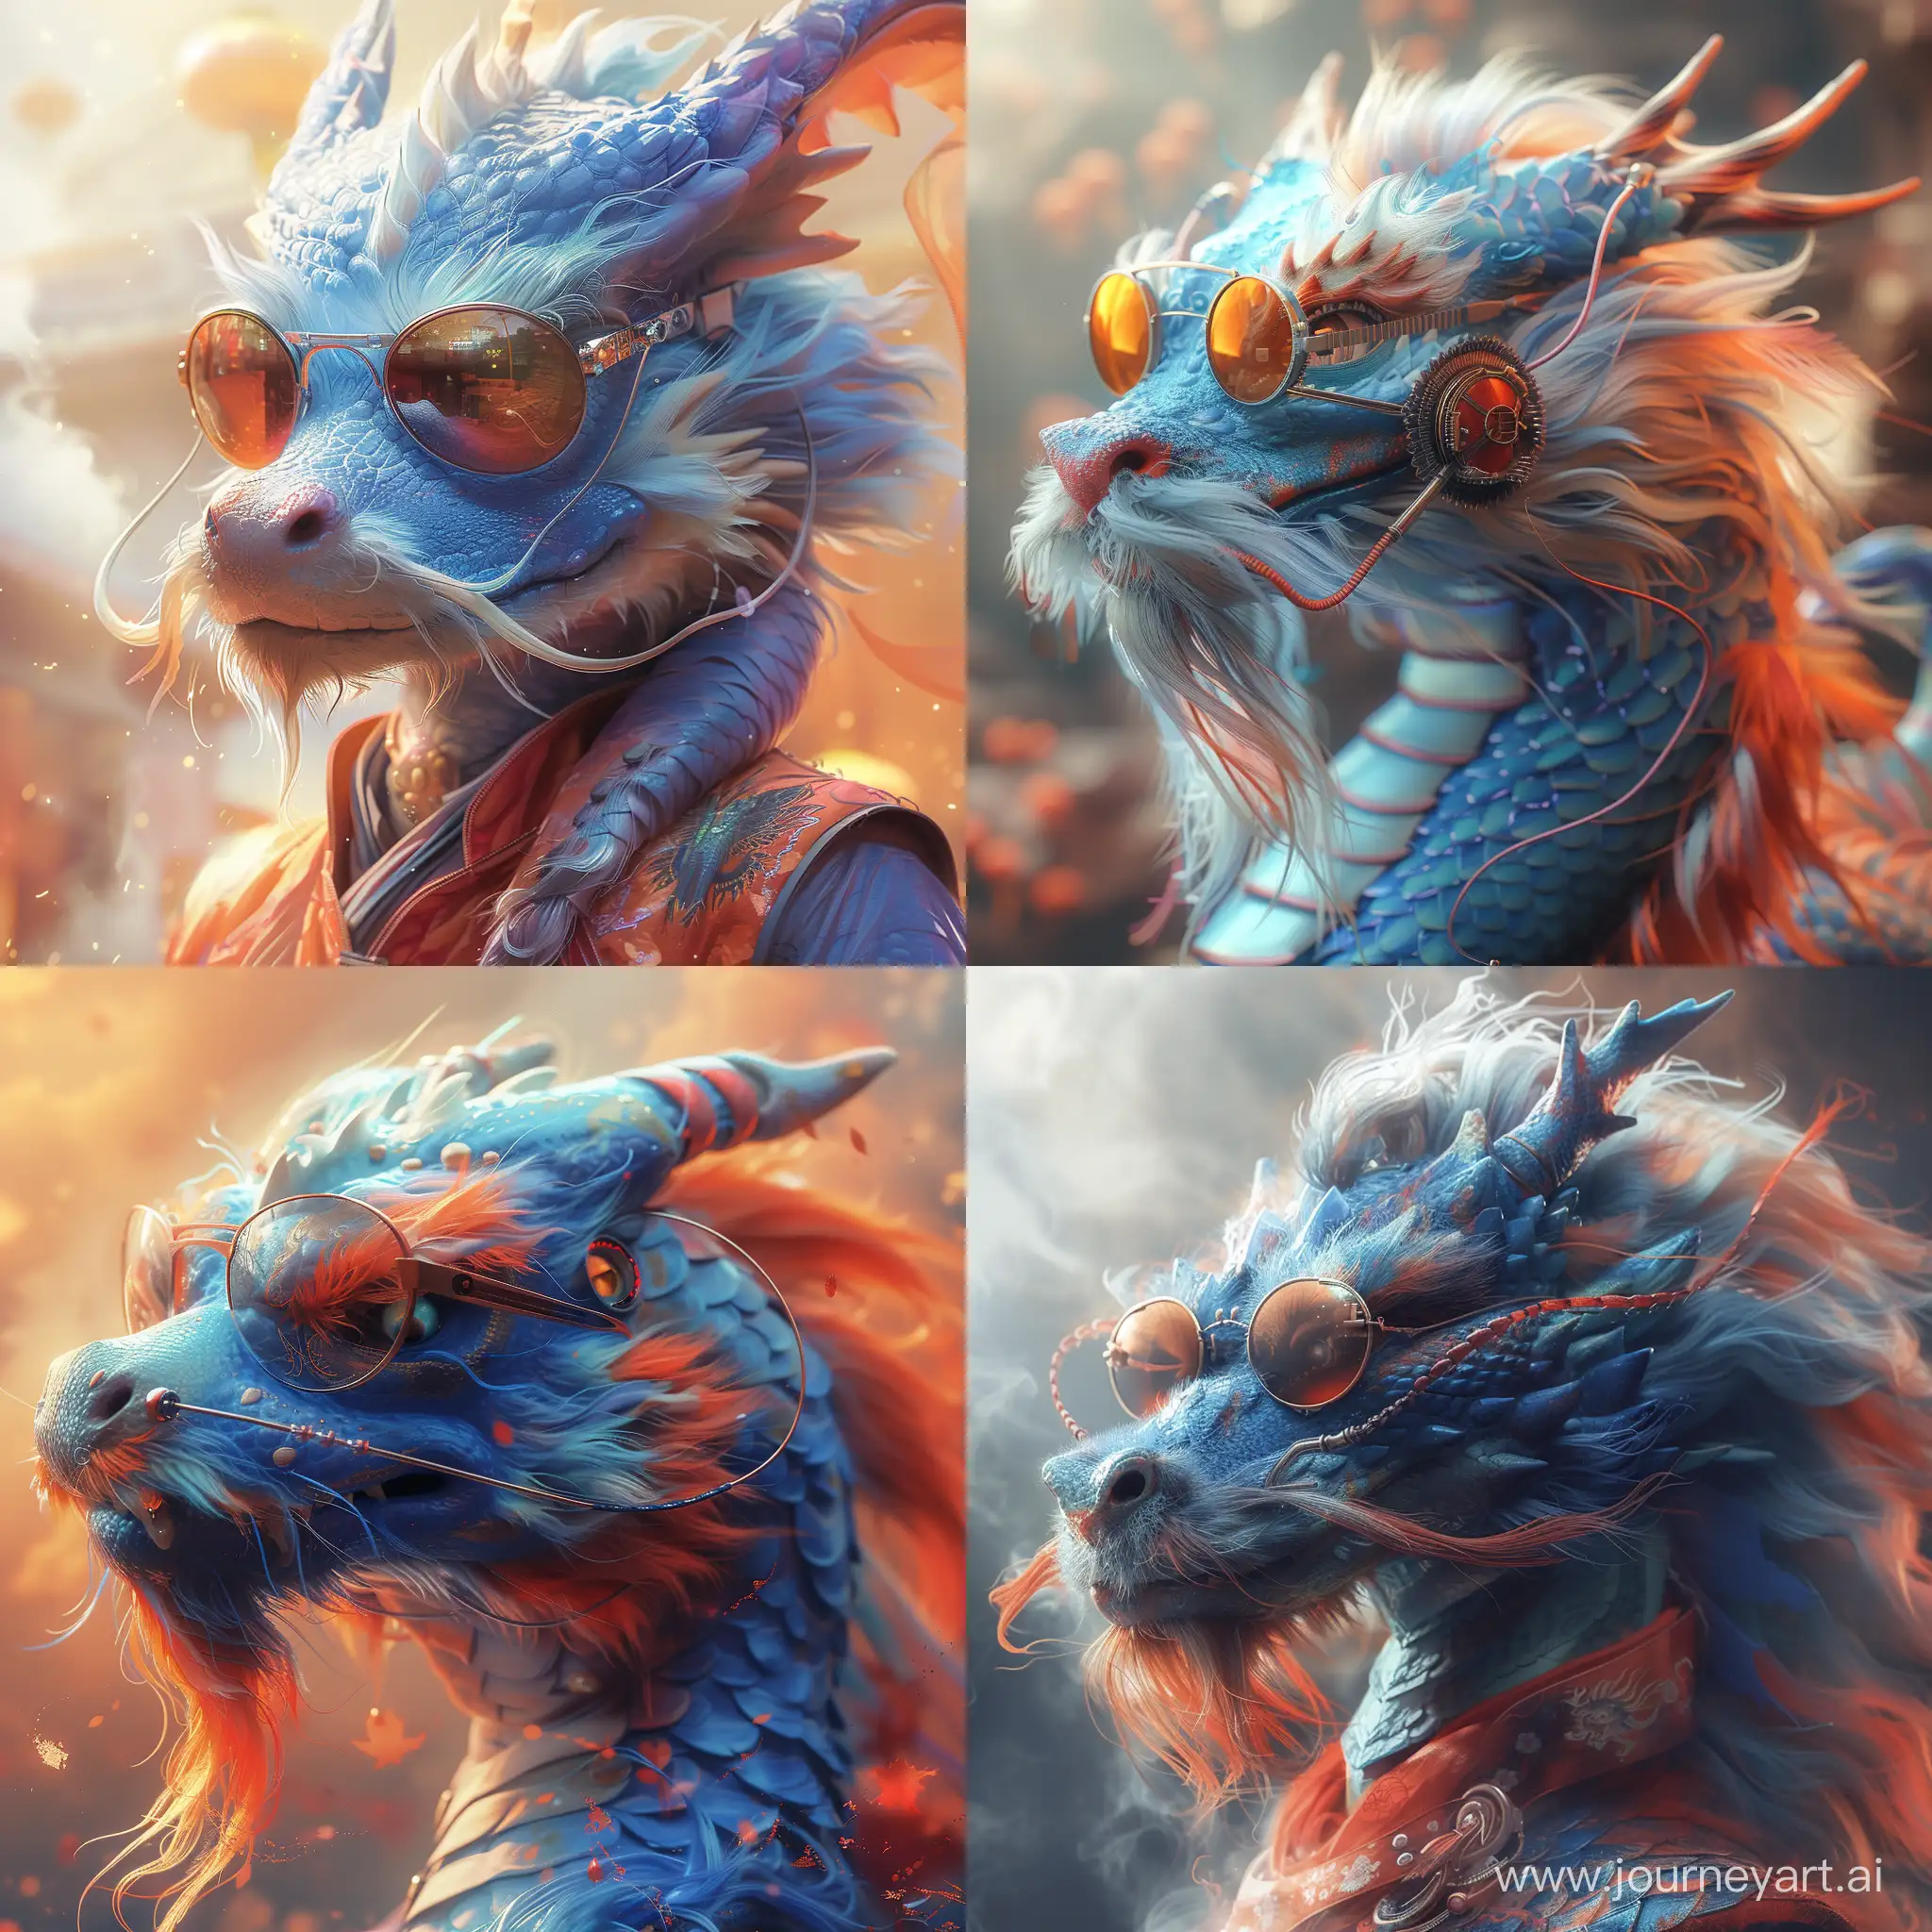 Chinapunk-Blue-Dragon-with-Meticulous-Design-and-Sunglasses-in-32K-UHD